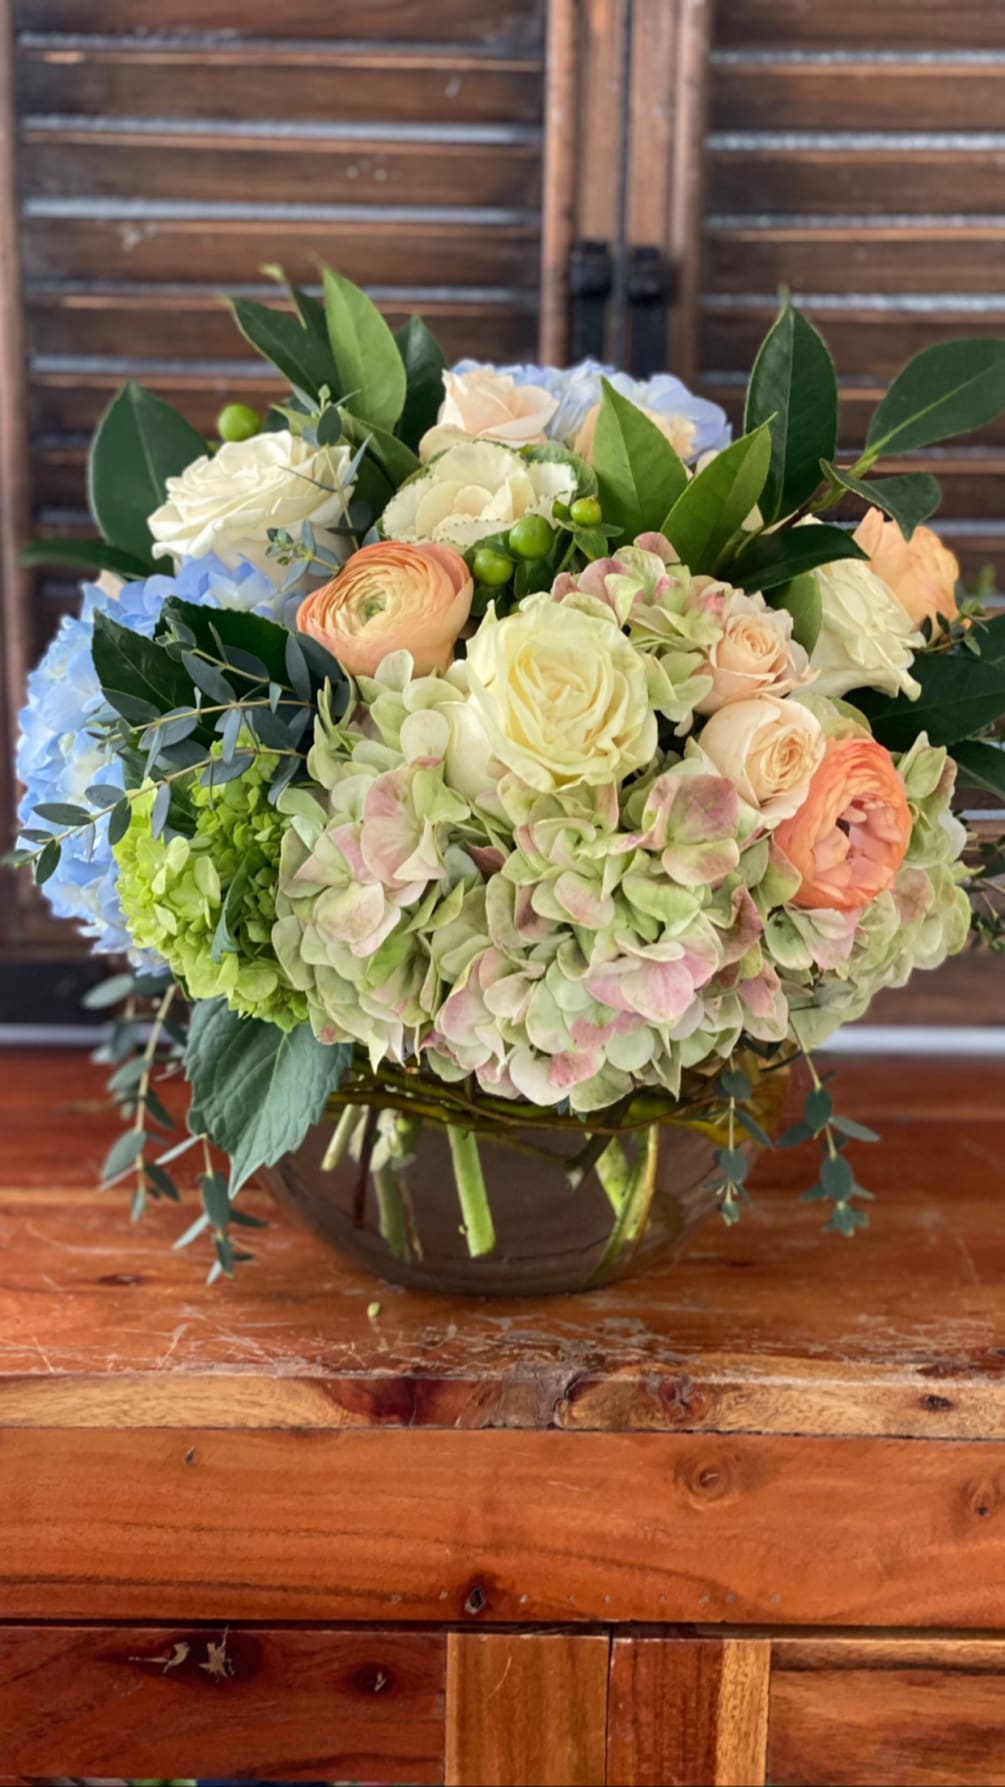 A light and simple assortment featuring antique hydrangea, ranunculus, and roses.